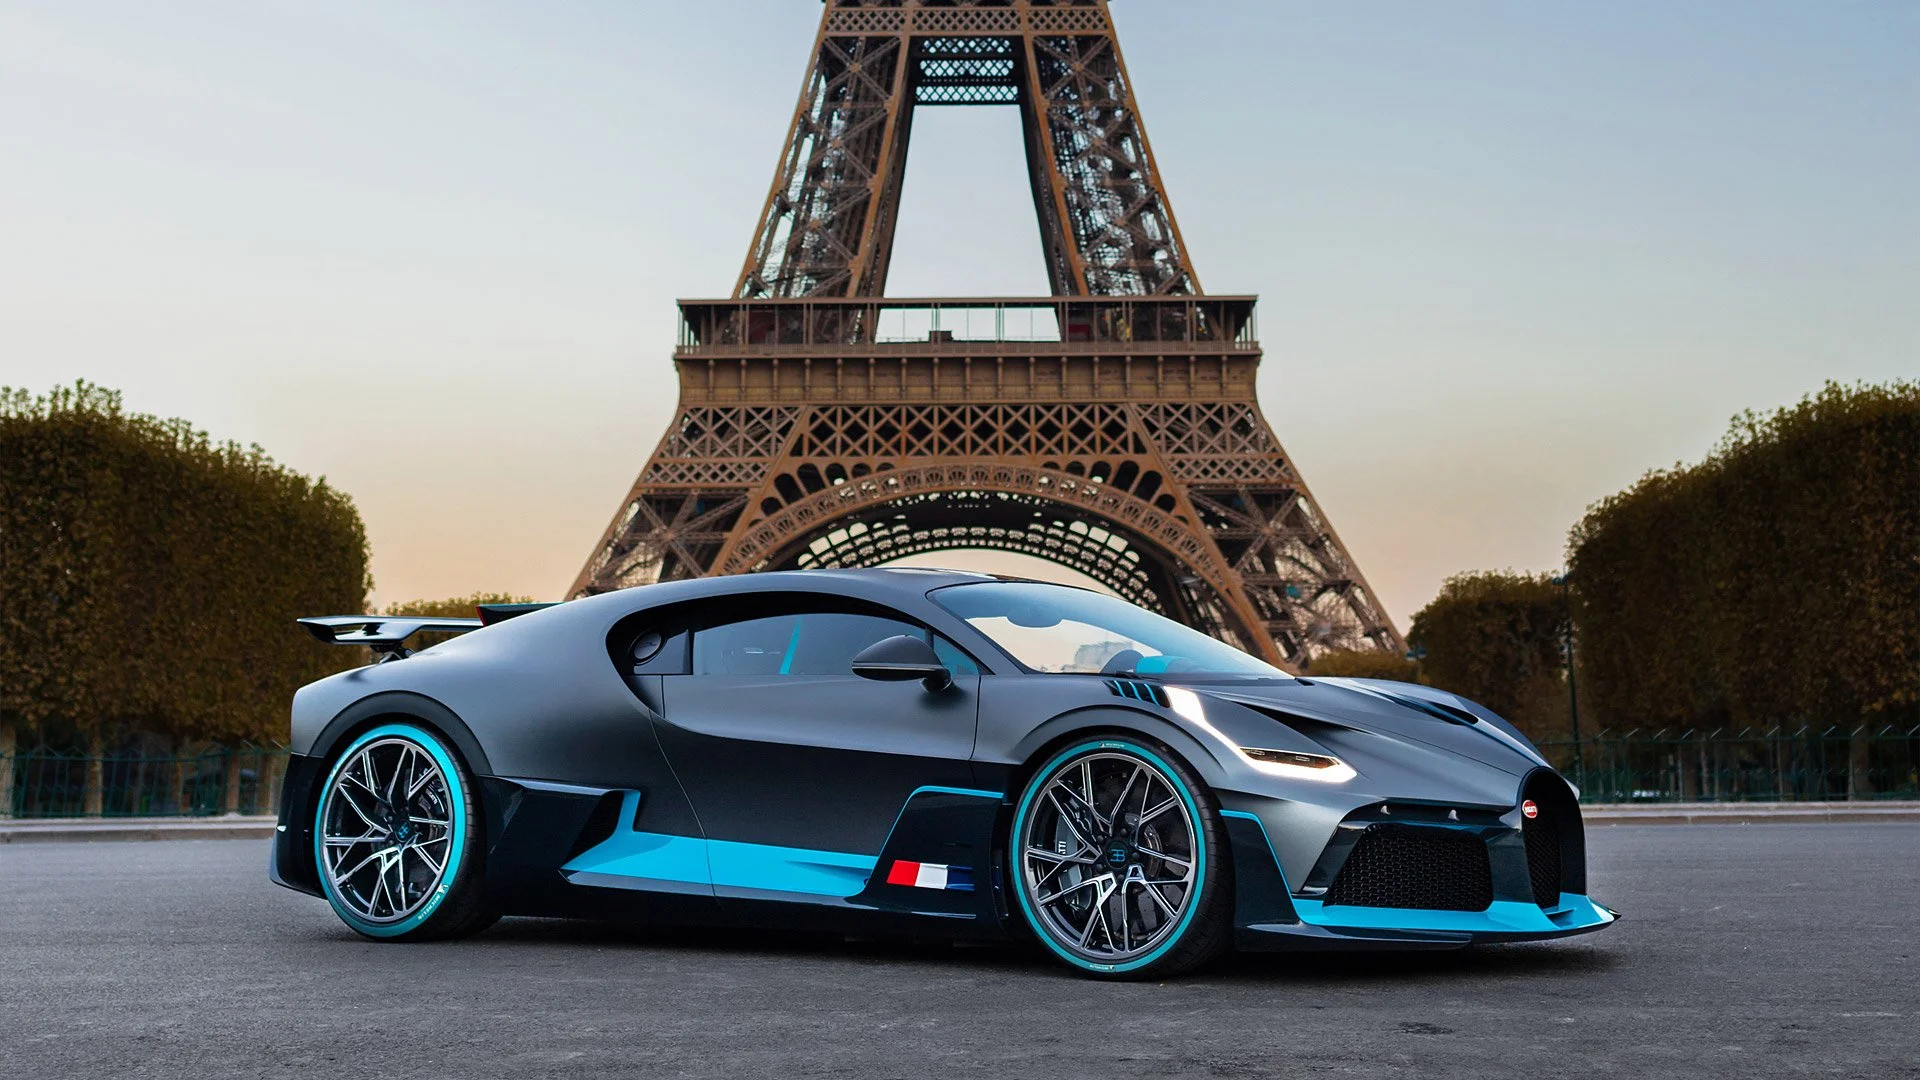 The Bugatti Divo Key Facts and Figures